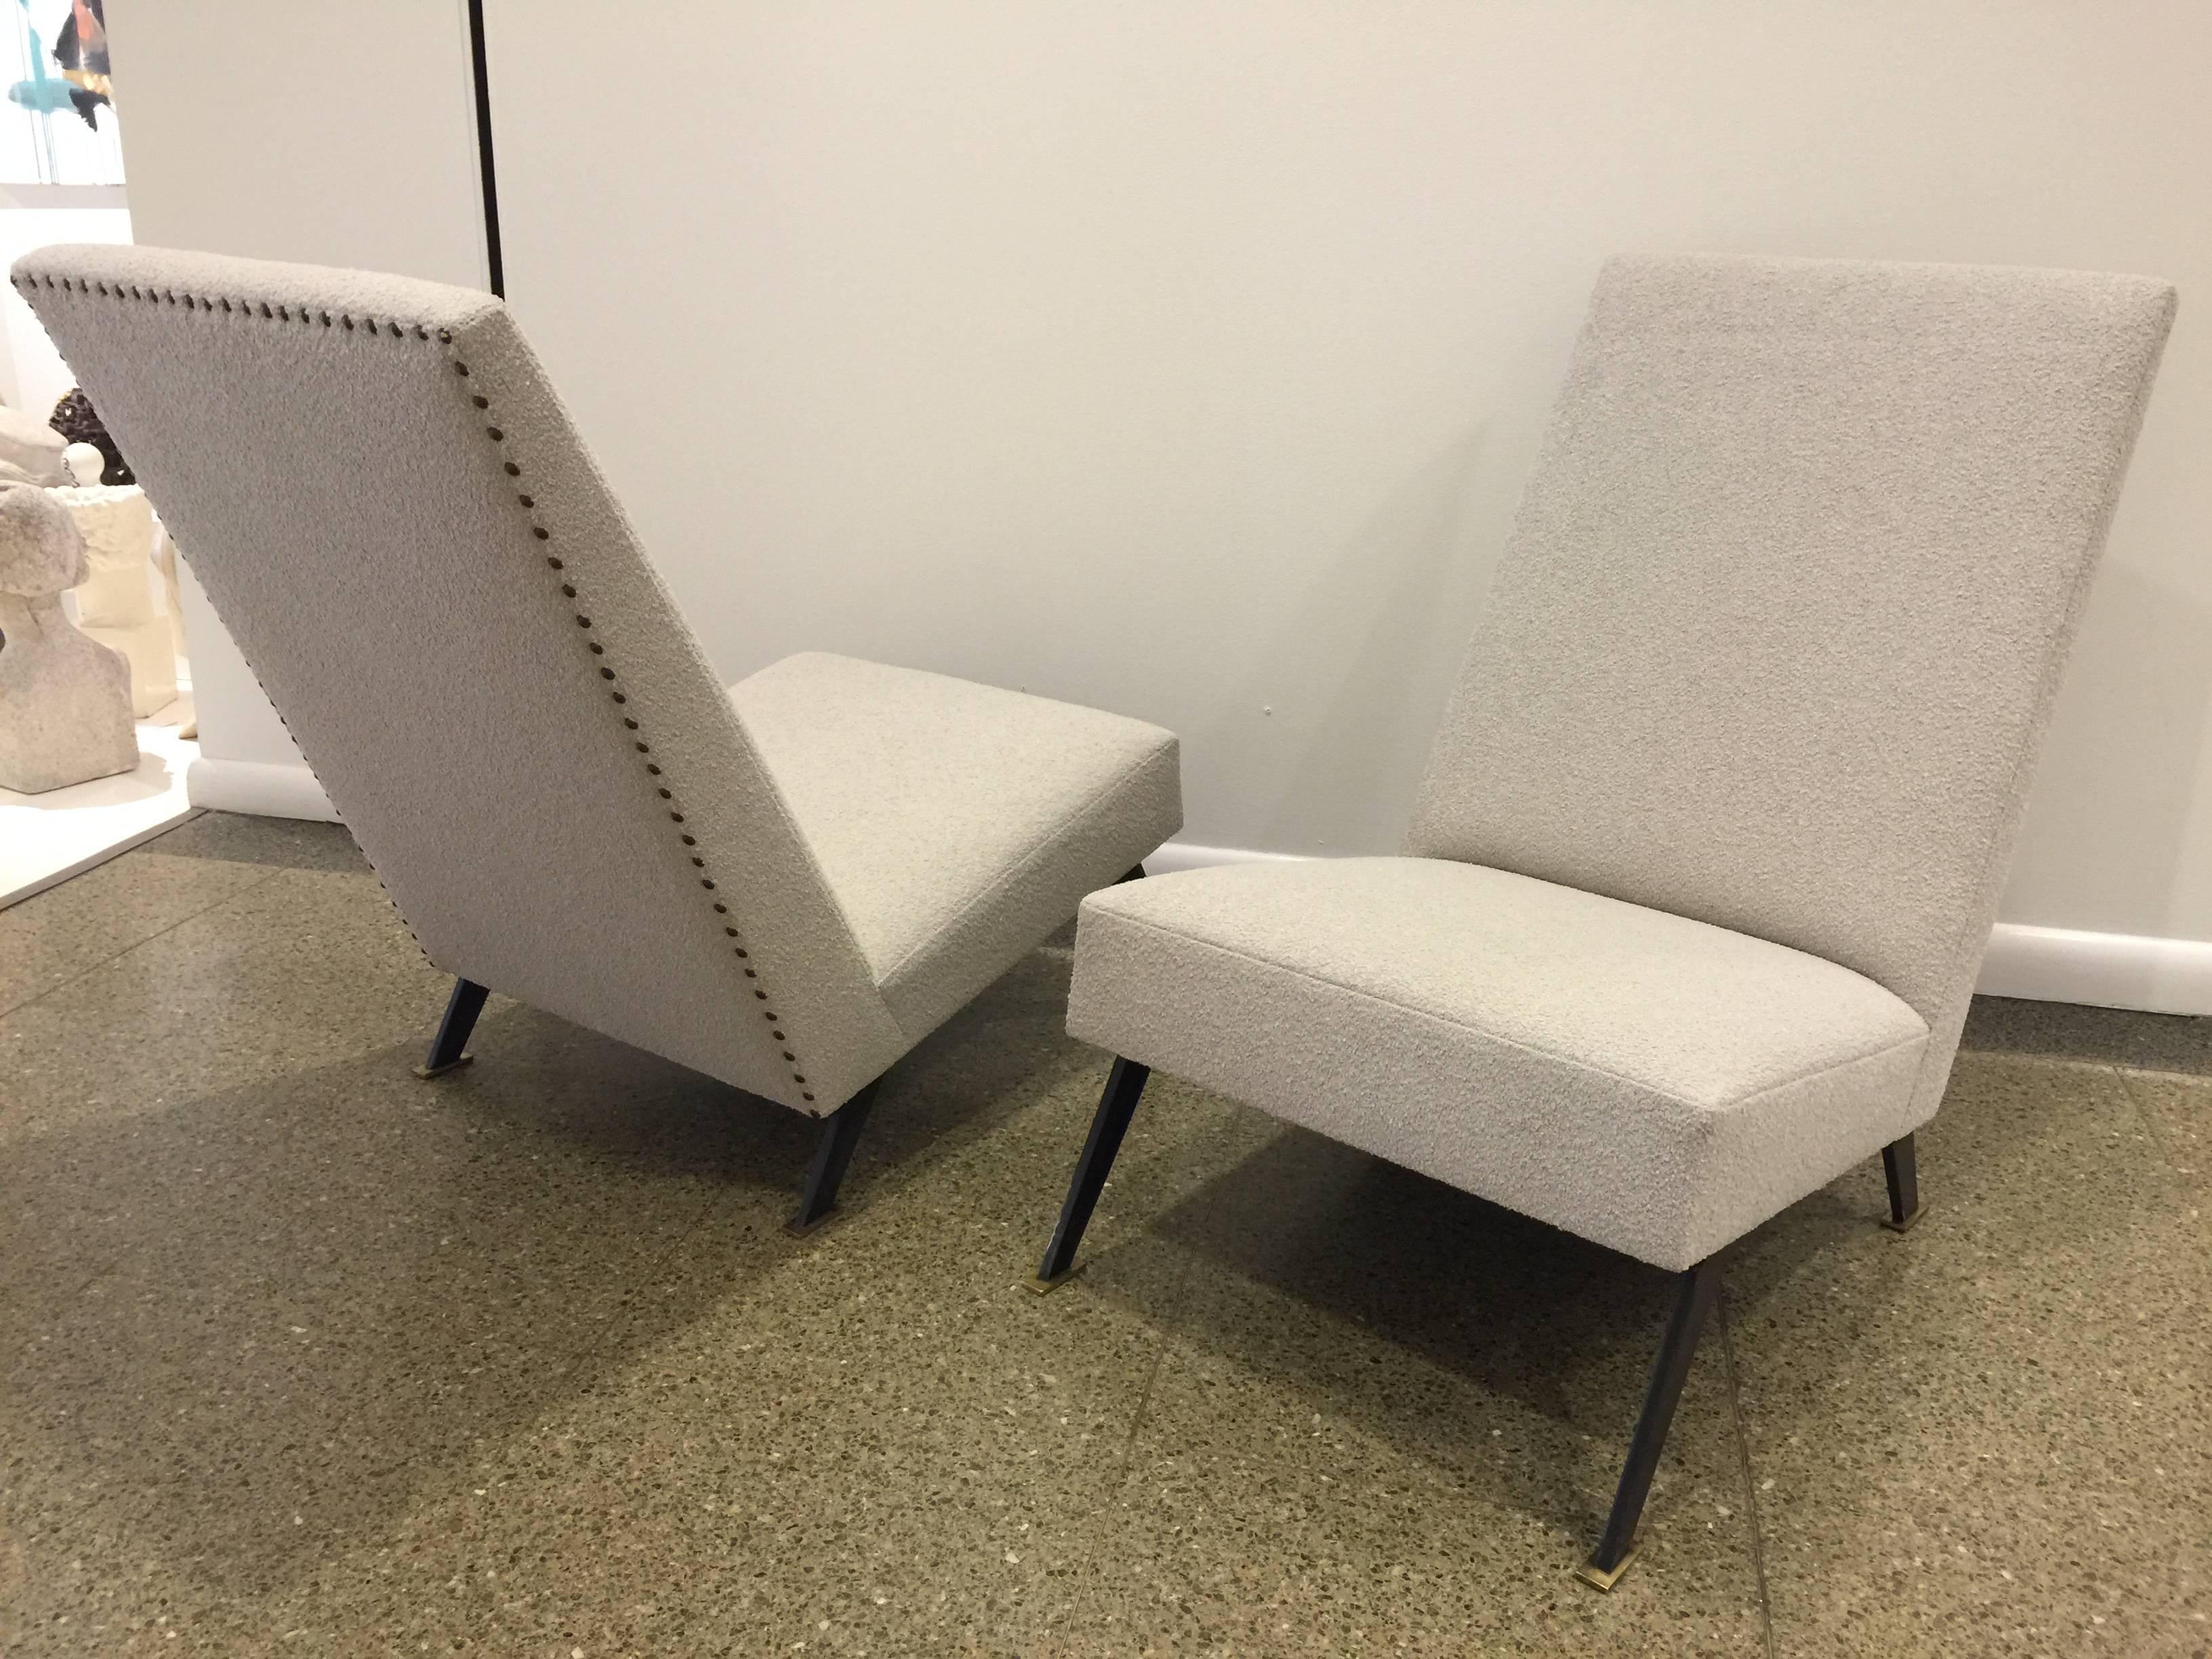 Finished with nailhead trim on reverse and chic dual metal feet. Sabre leg design, these extremely linearly designed chairs are very comfortable.

